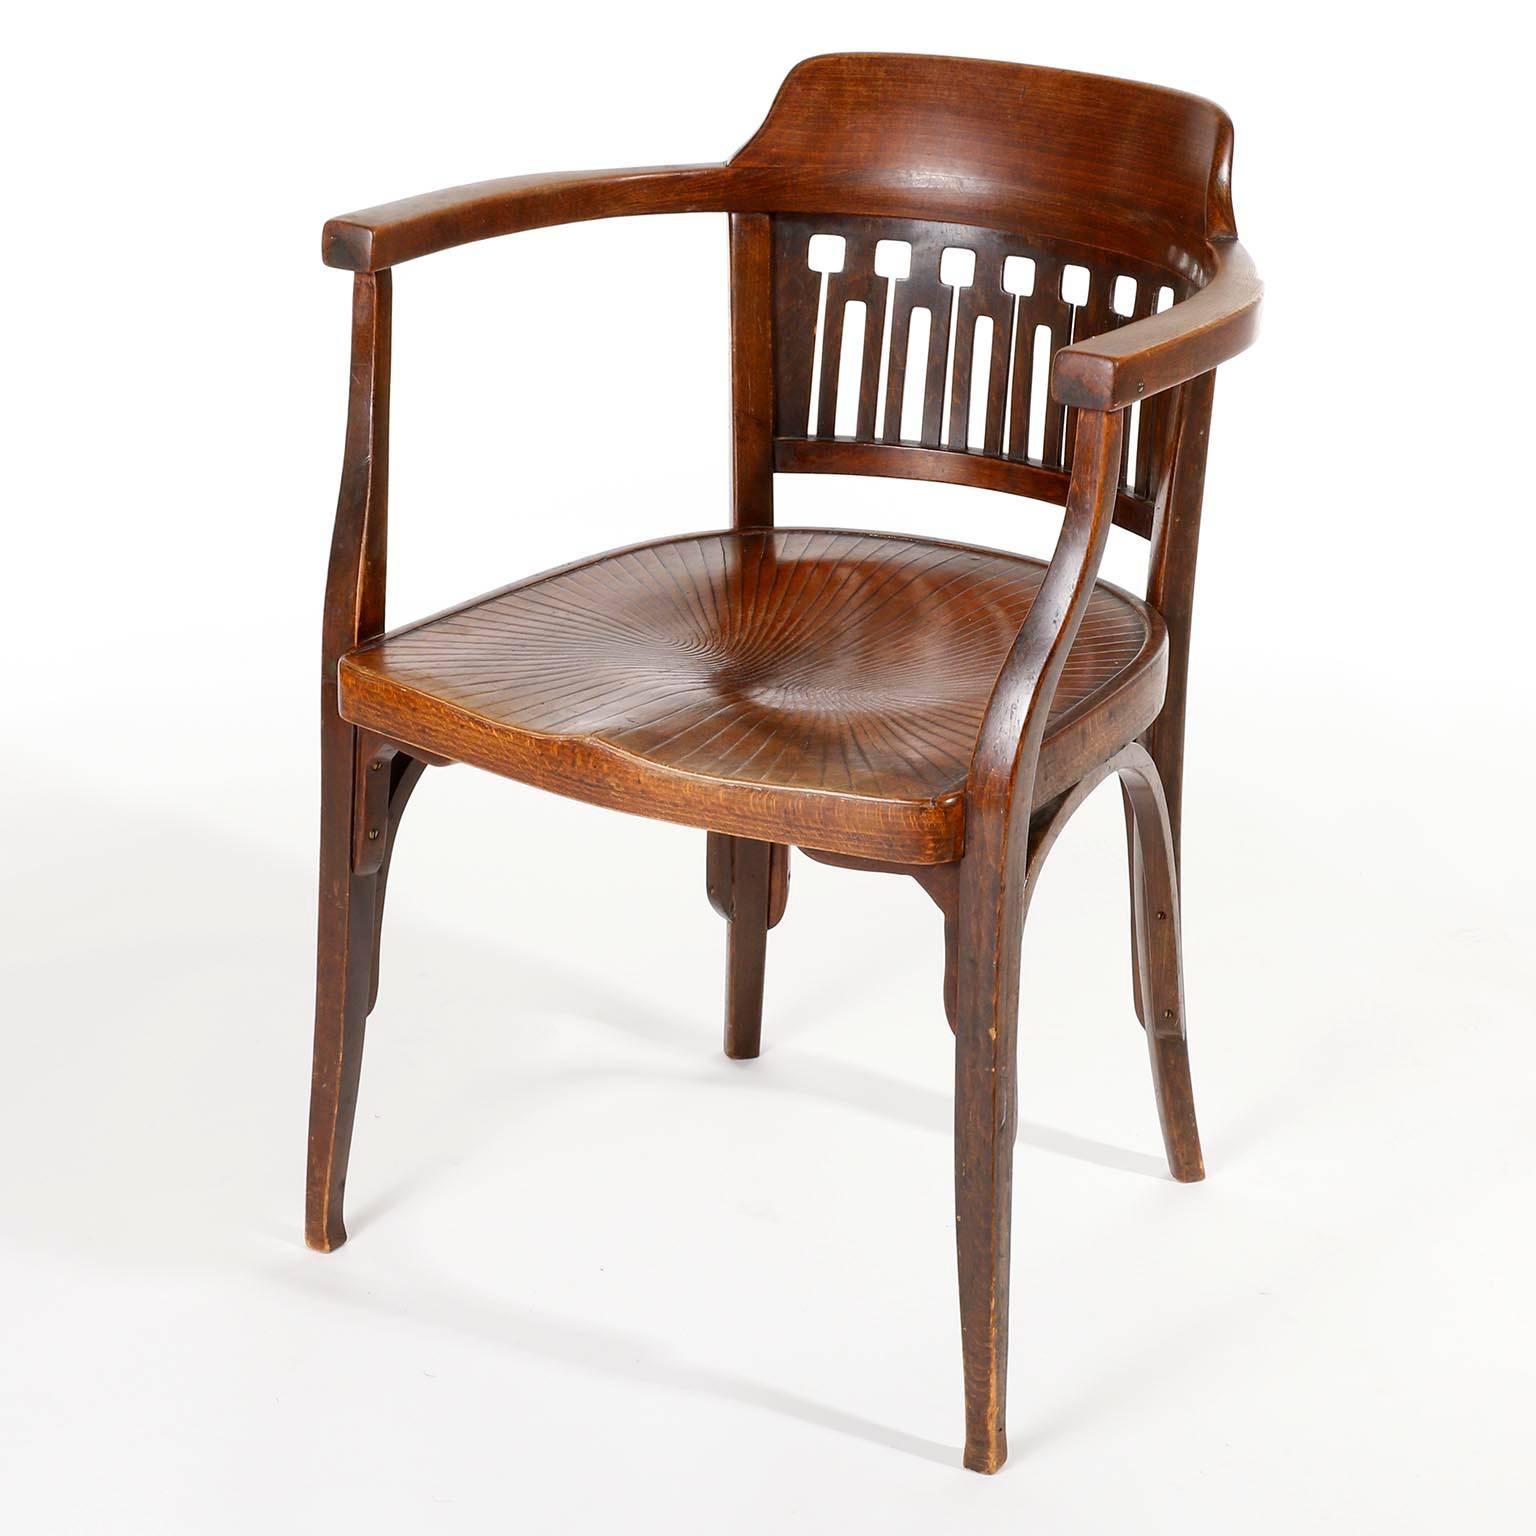 A Vienna Secession bentwood armchair by Otto Wagner and manufactured by Jacob & Josef Kohn (J. & J. Kohn), Austria, circa 1900.

This chair is an authentic piece which is in great original condition with nice patina. It is made of brown stained